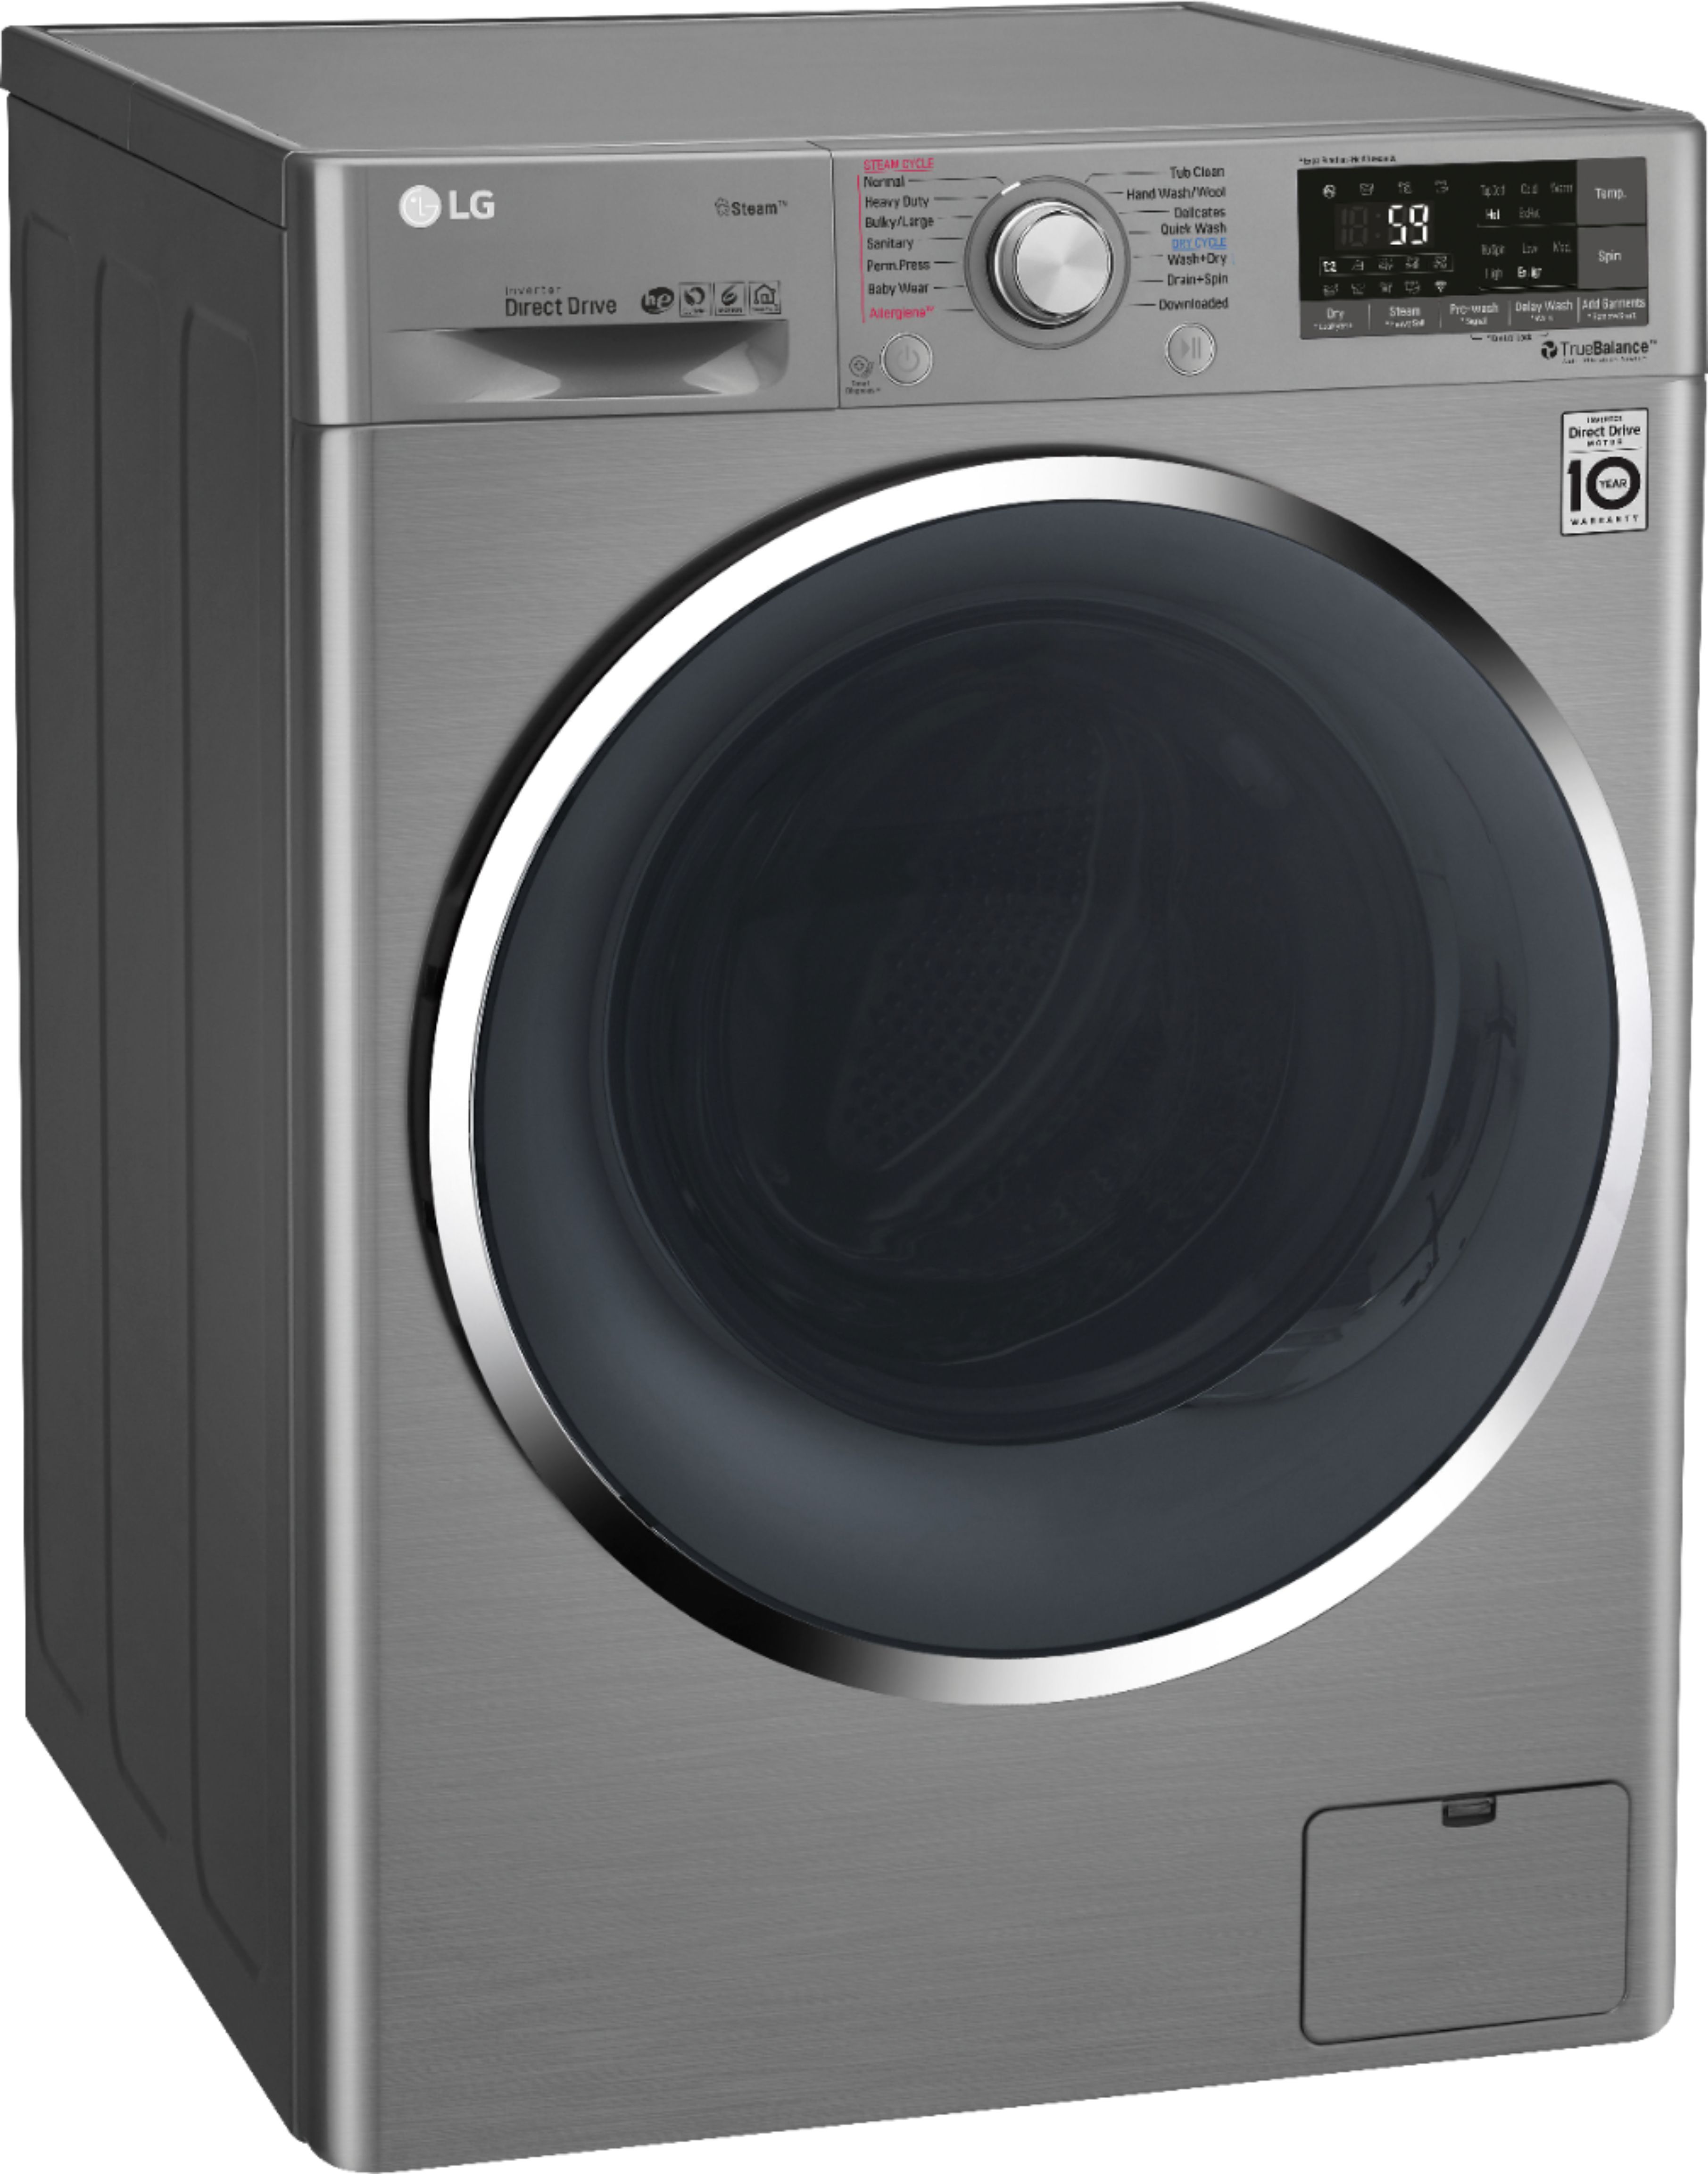 Angle View: LG - 2.3 Cu. Ft. High-Efficiency Smart Front-Load Washer and Electric Dryer Combo with Steam and 6Motion Technology - Graphite Steel